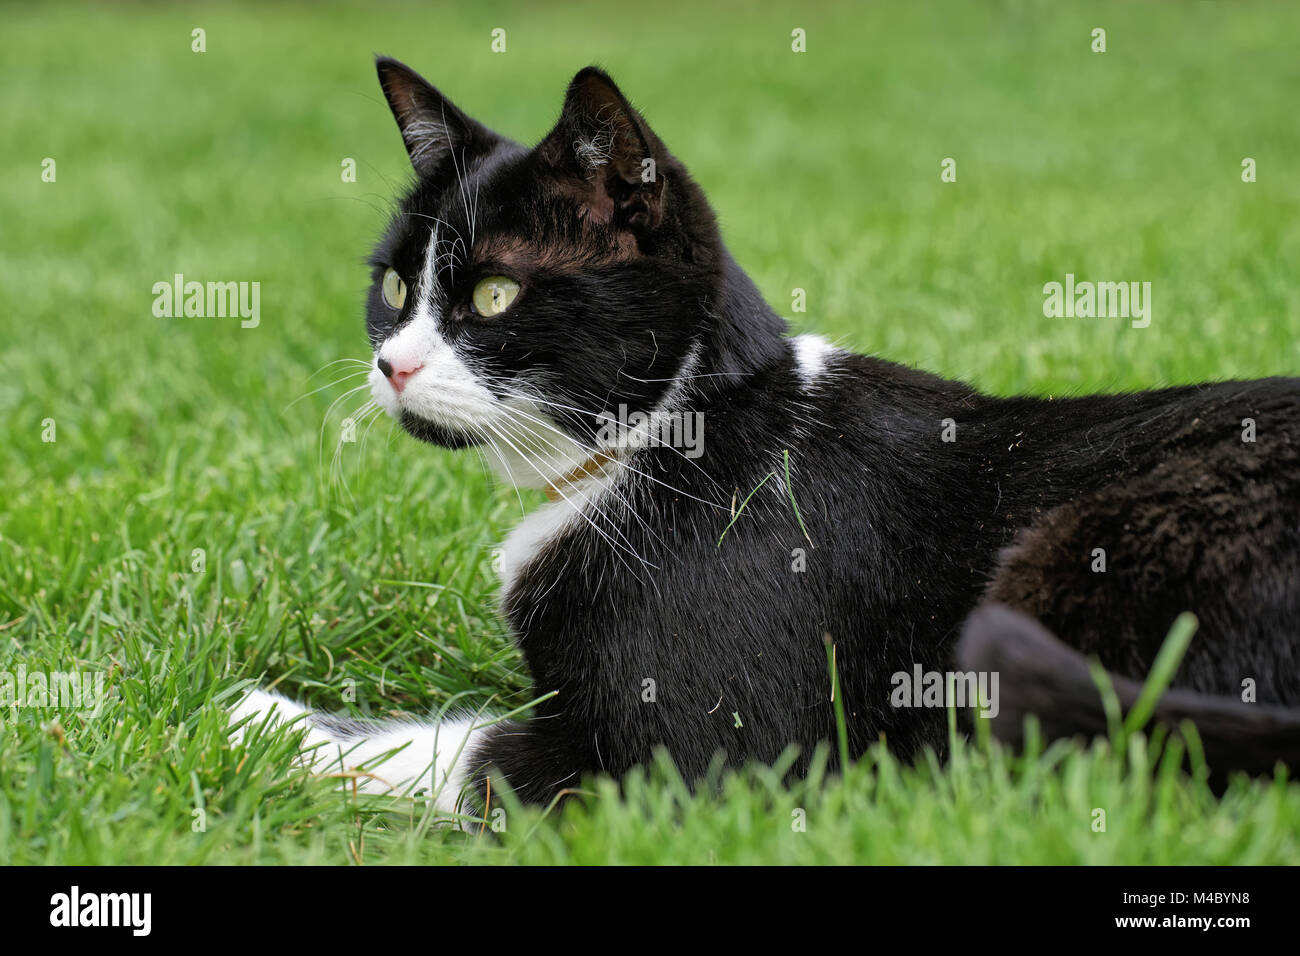 young cat in the grass Stock Photo